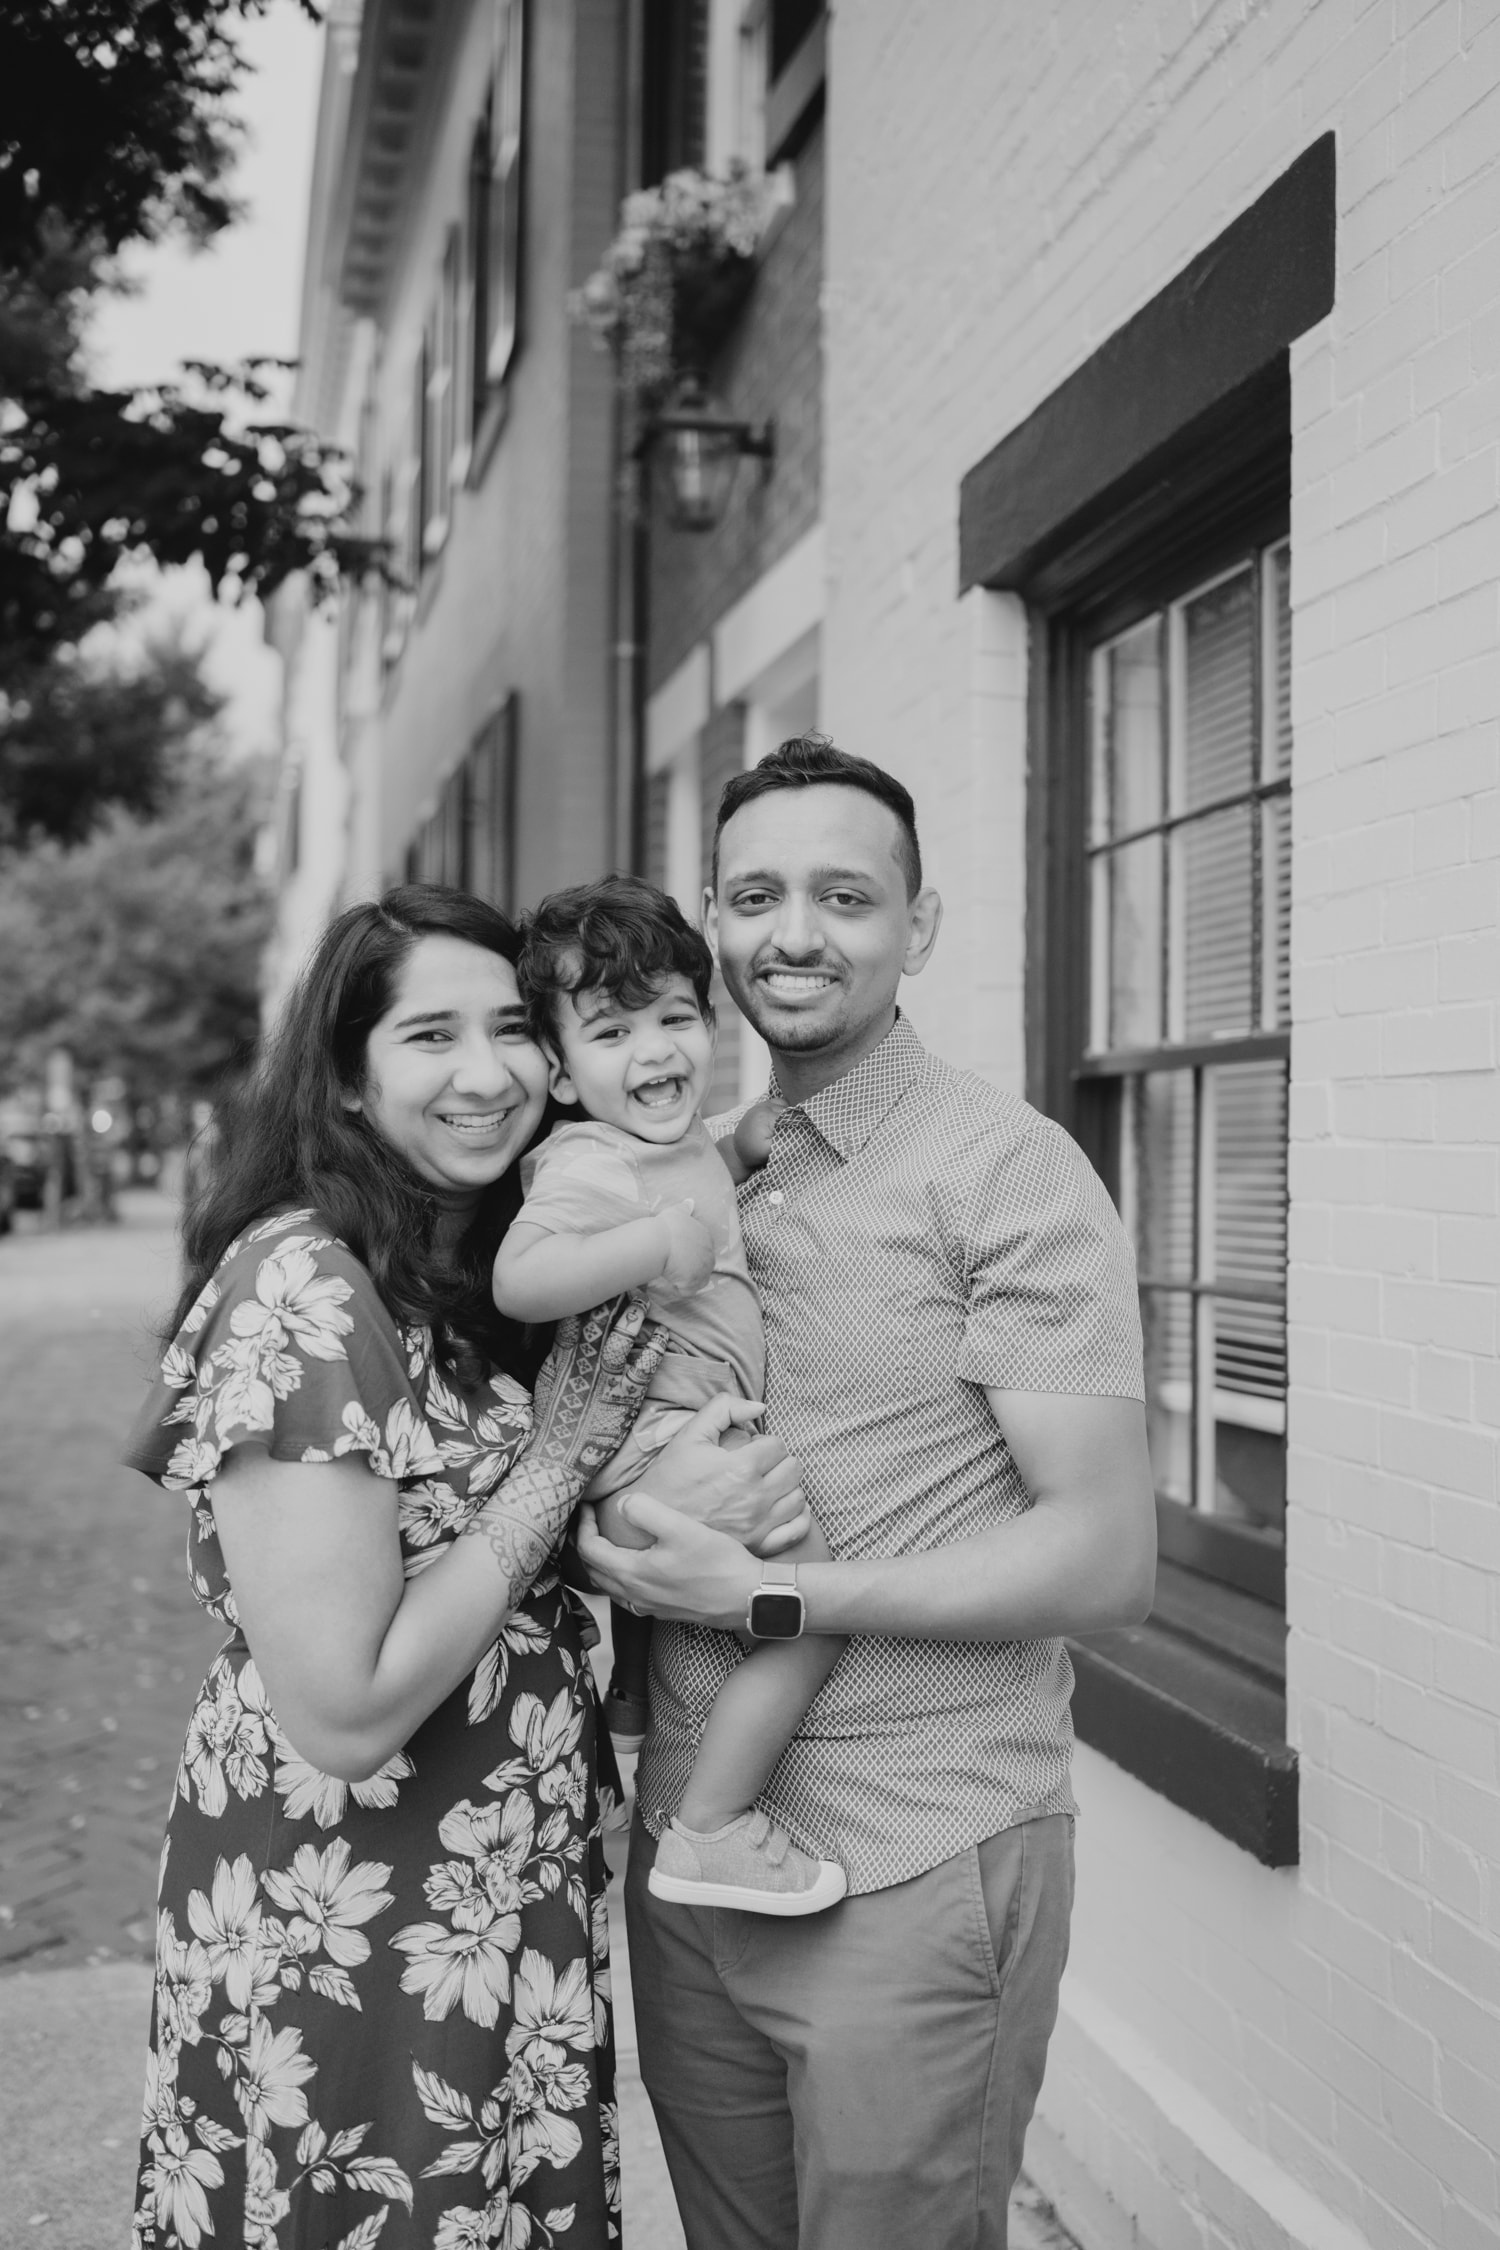 family photography portraits in street harbor outdoors of old town alexandria virginia